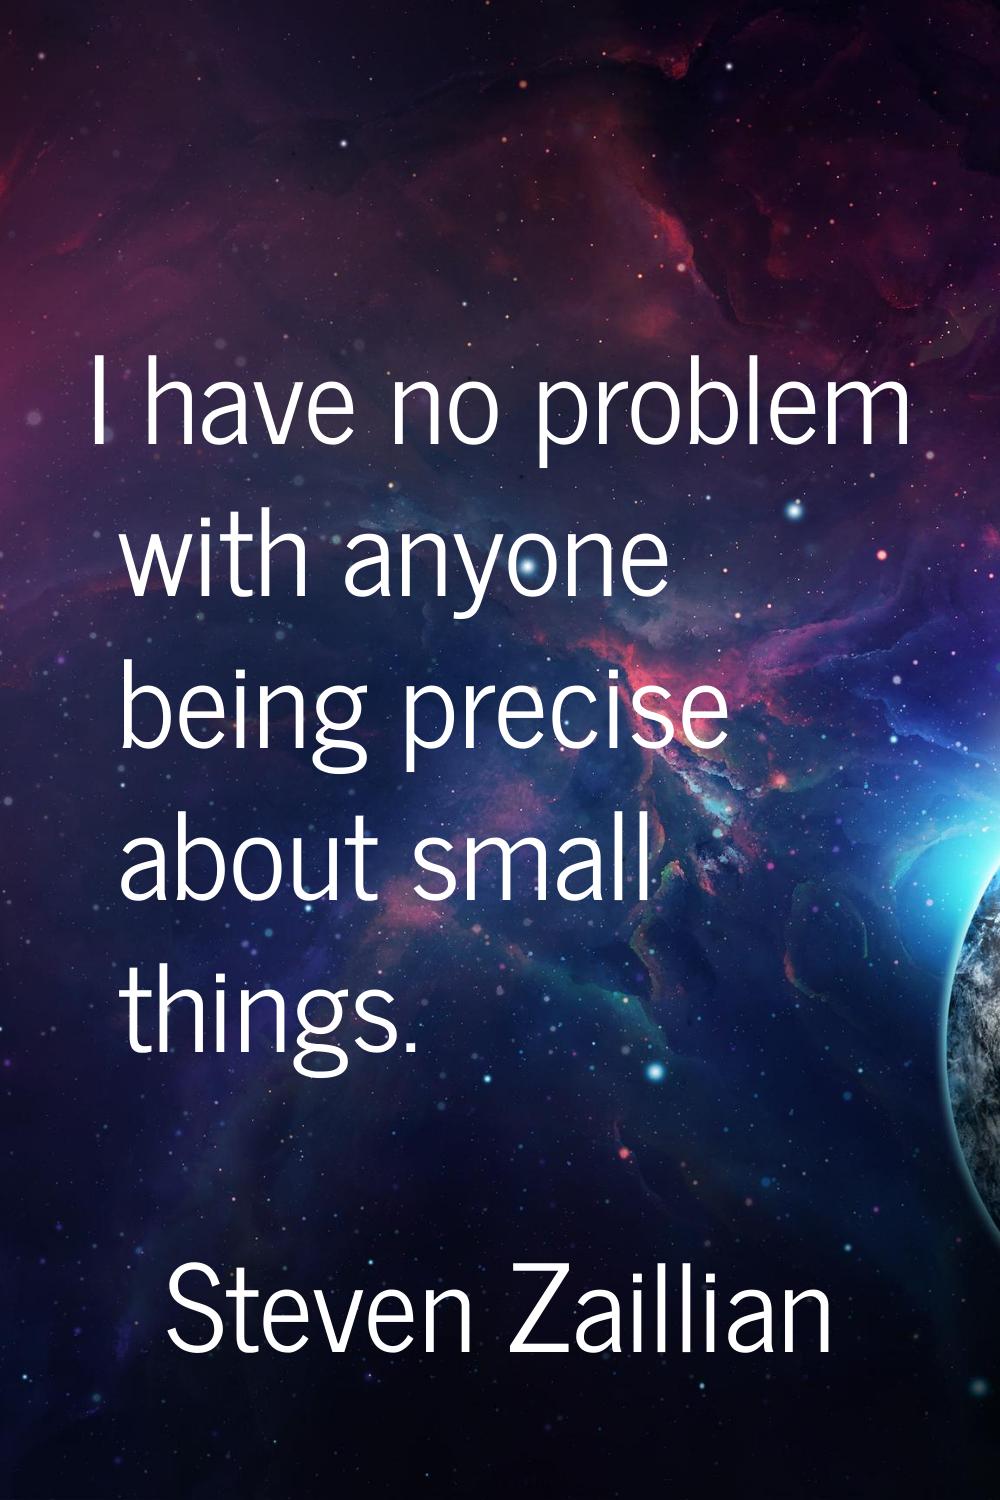 I have no problem with anyone being precise about small things.